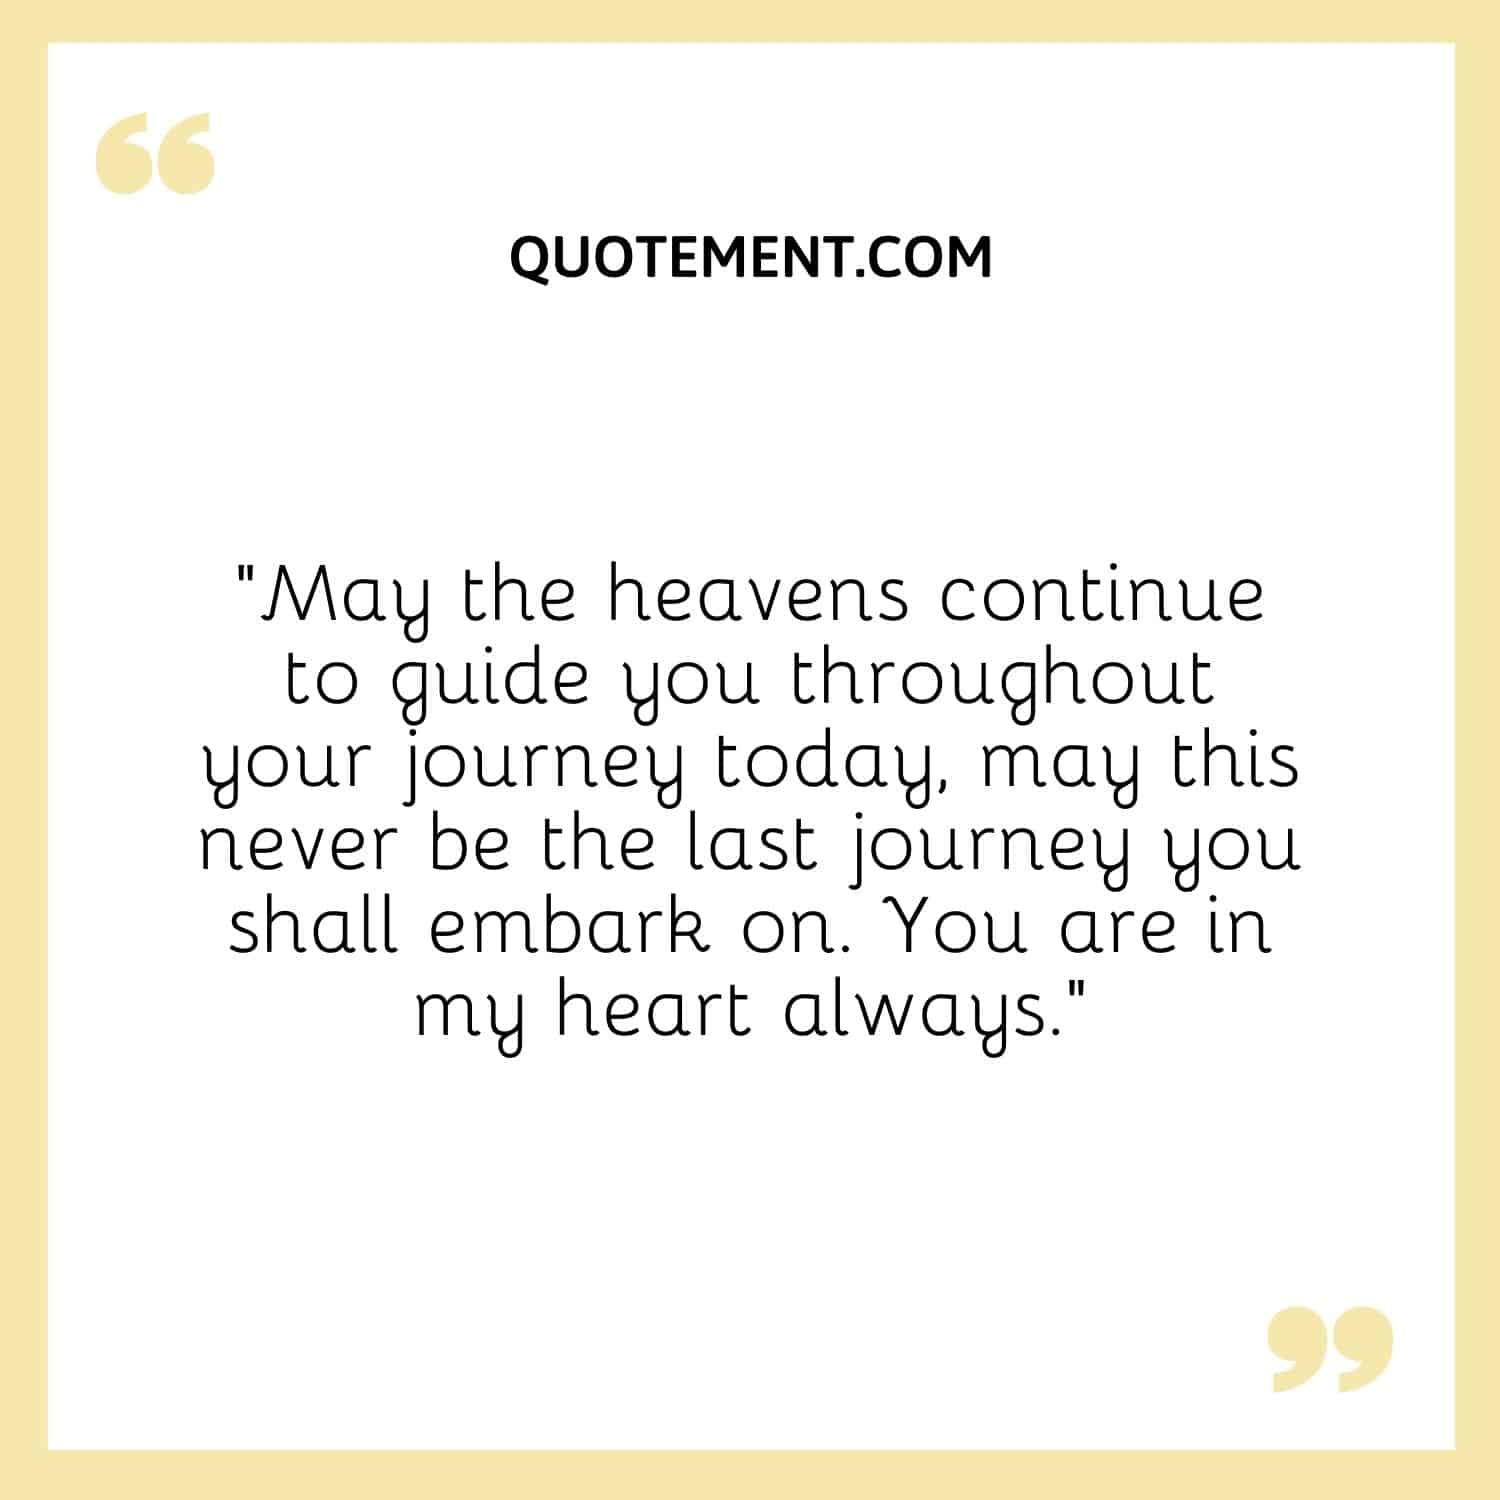 May the heavens continue to guide you throughout your journey today,